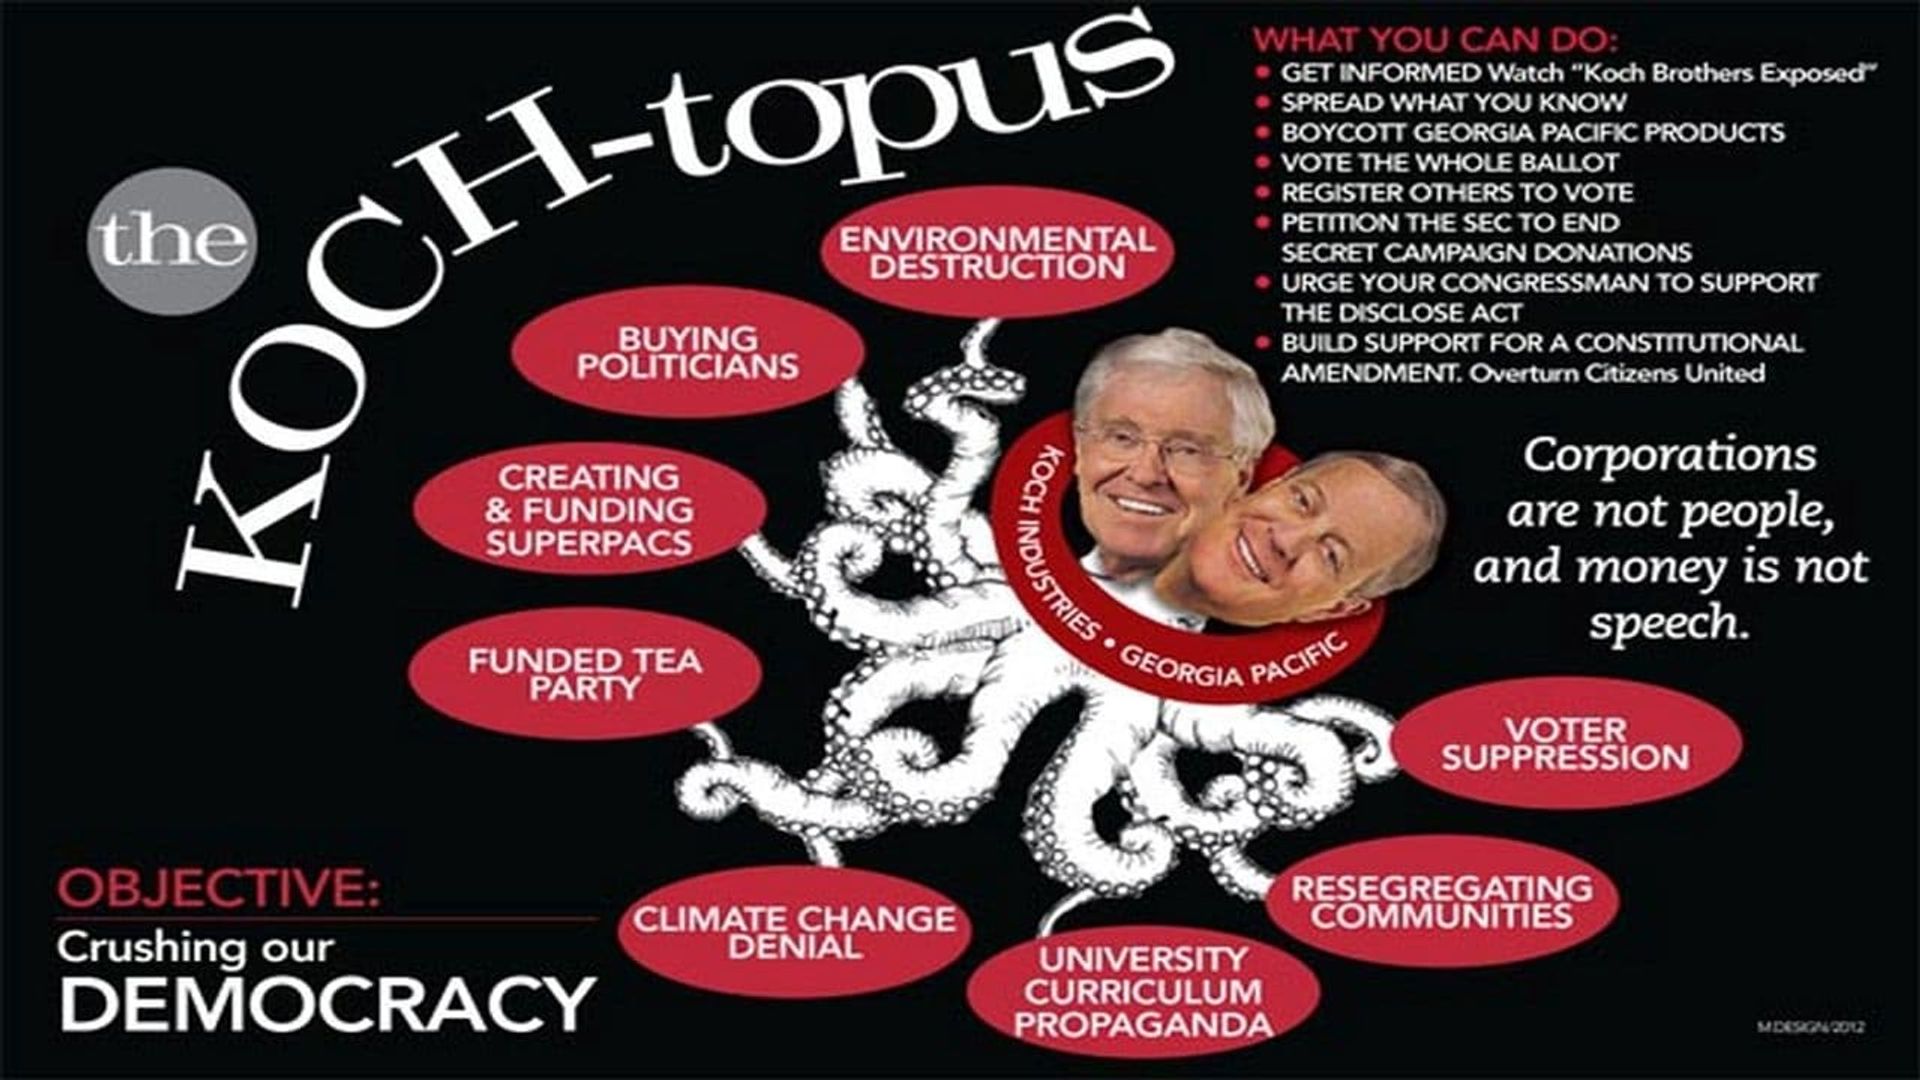 Koch Brothers Exposed background